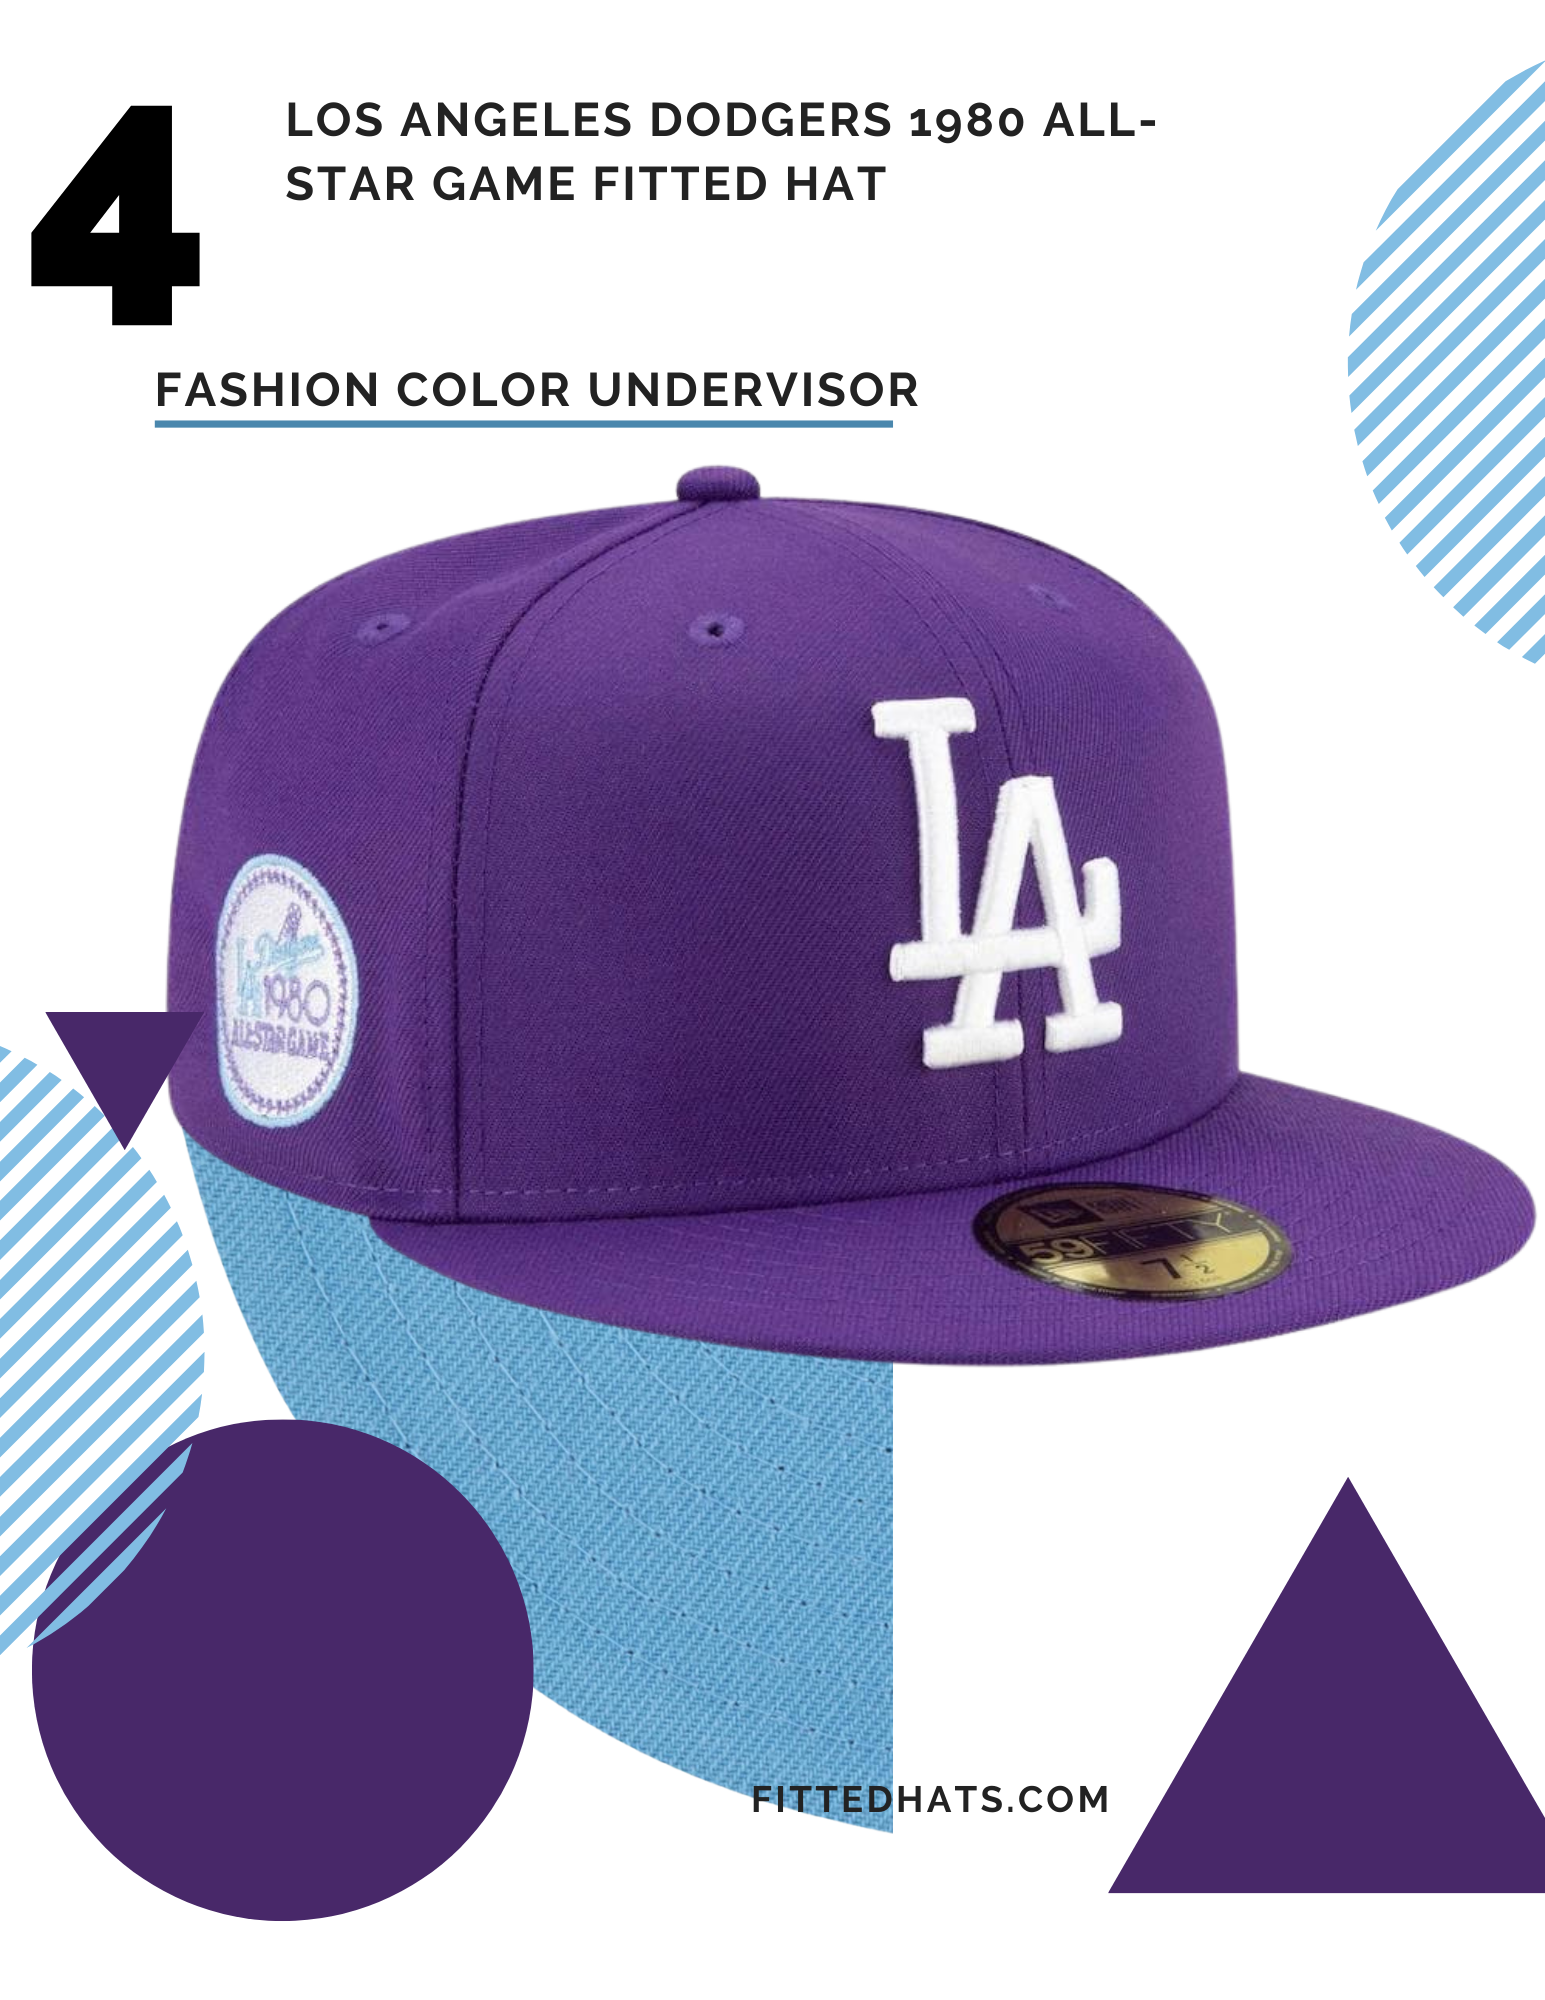 Los Angeles Dodgers 1980 All-Star Game Fashion Color Undervisor Fitted Hat